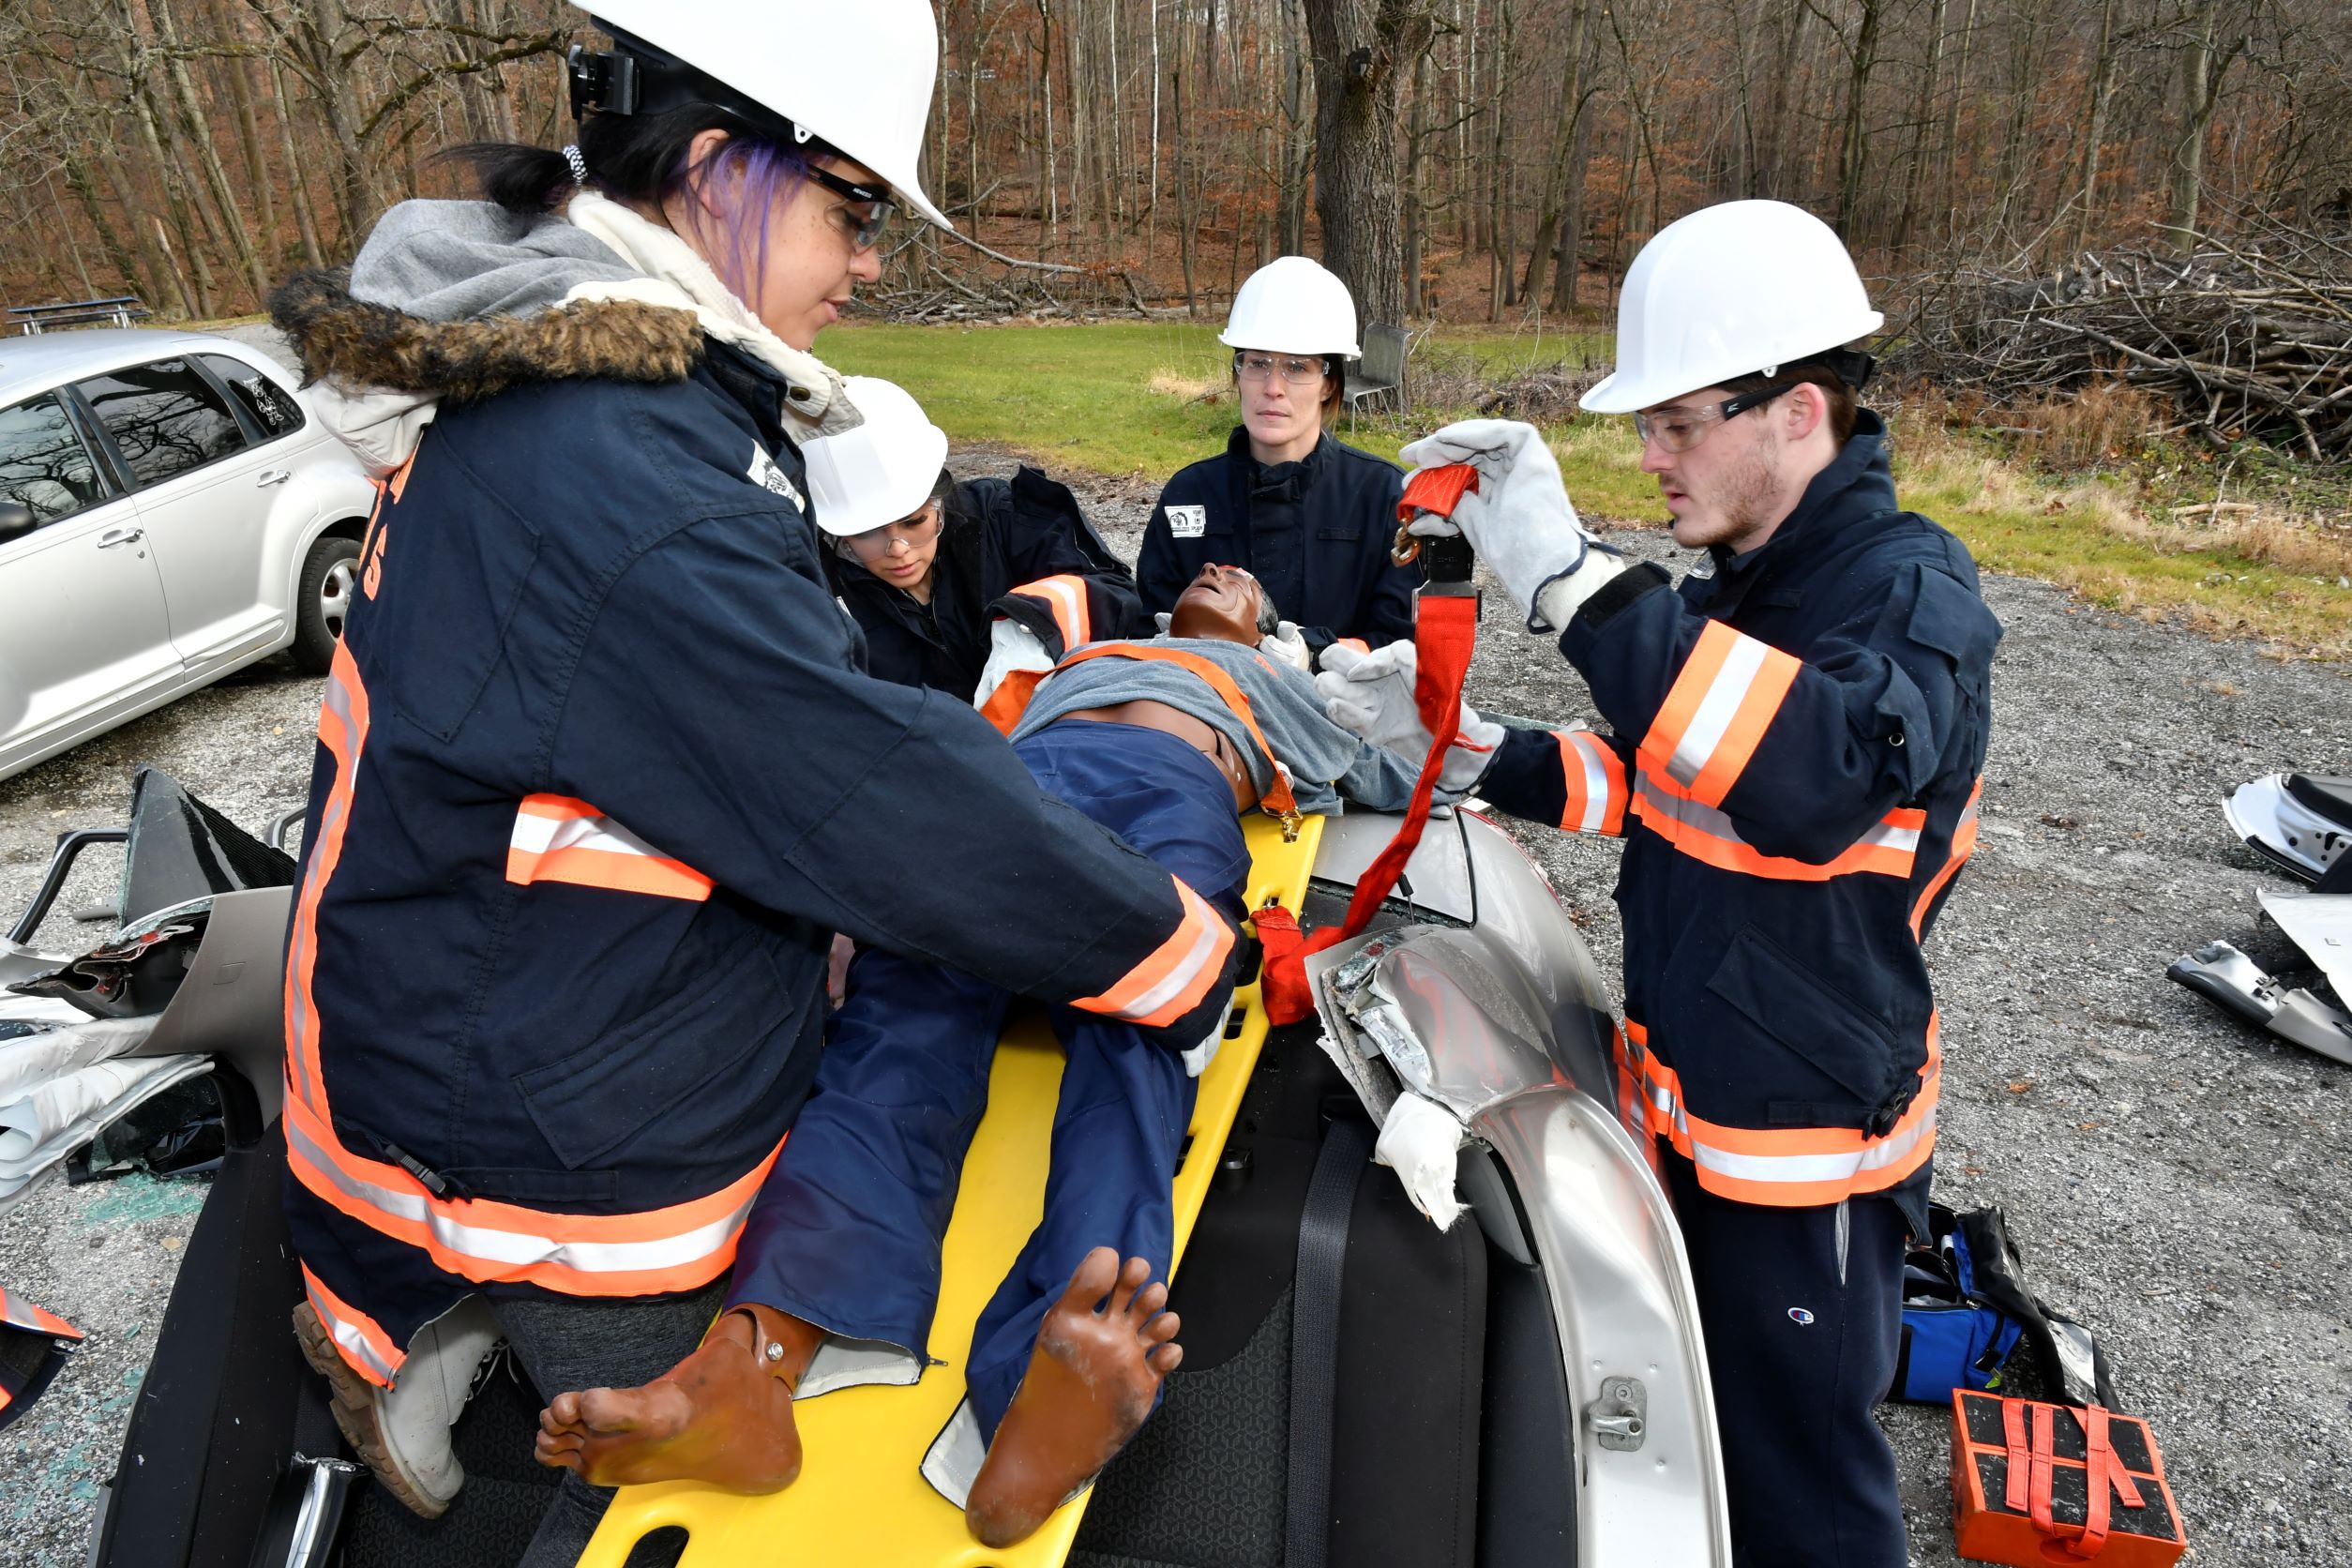 Four EMS-100 students extricate a simulated male manikin from a car opened with extrication rescue tools from Broomall Fire Company Rescue 53